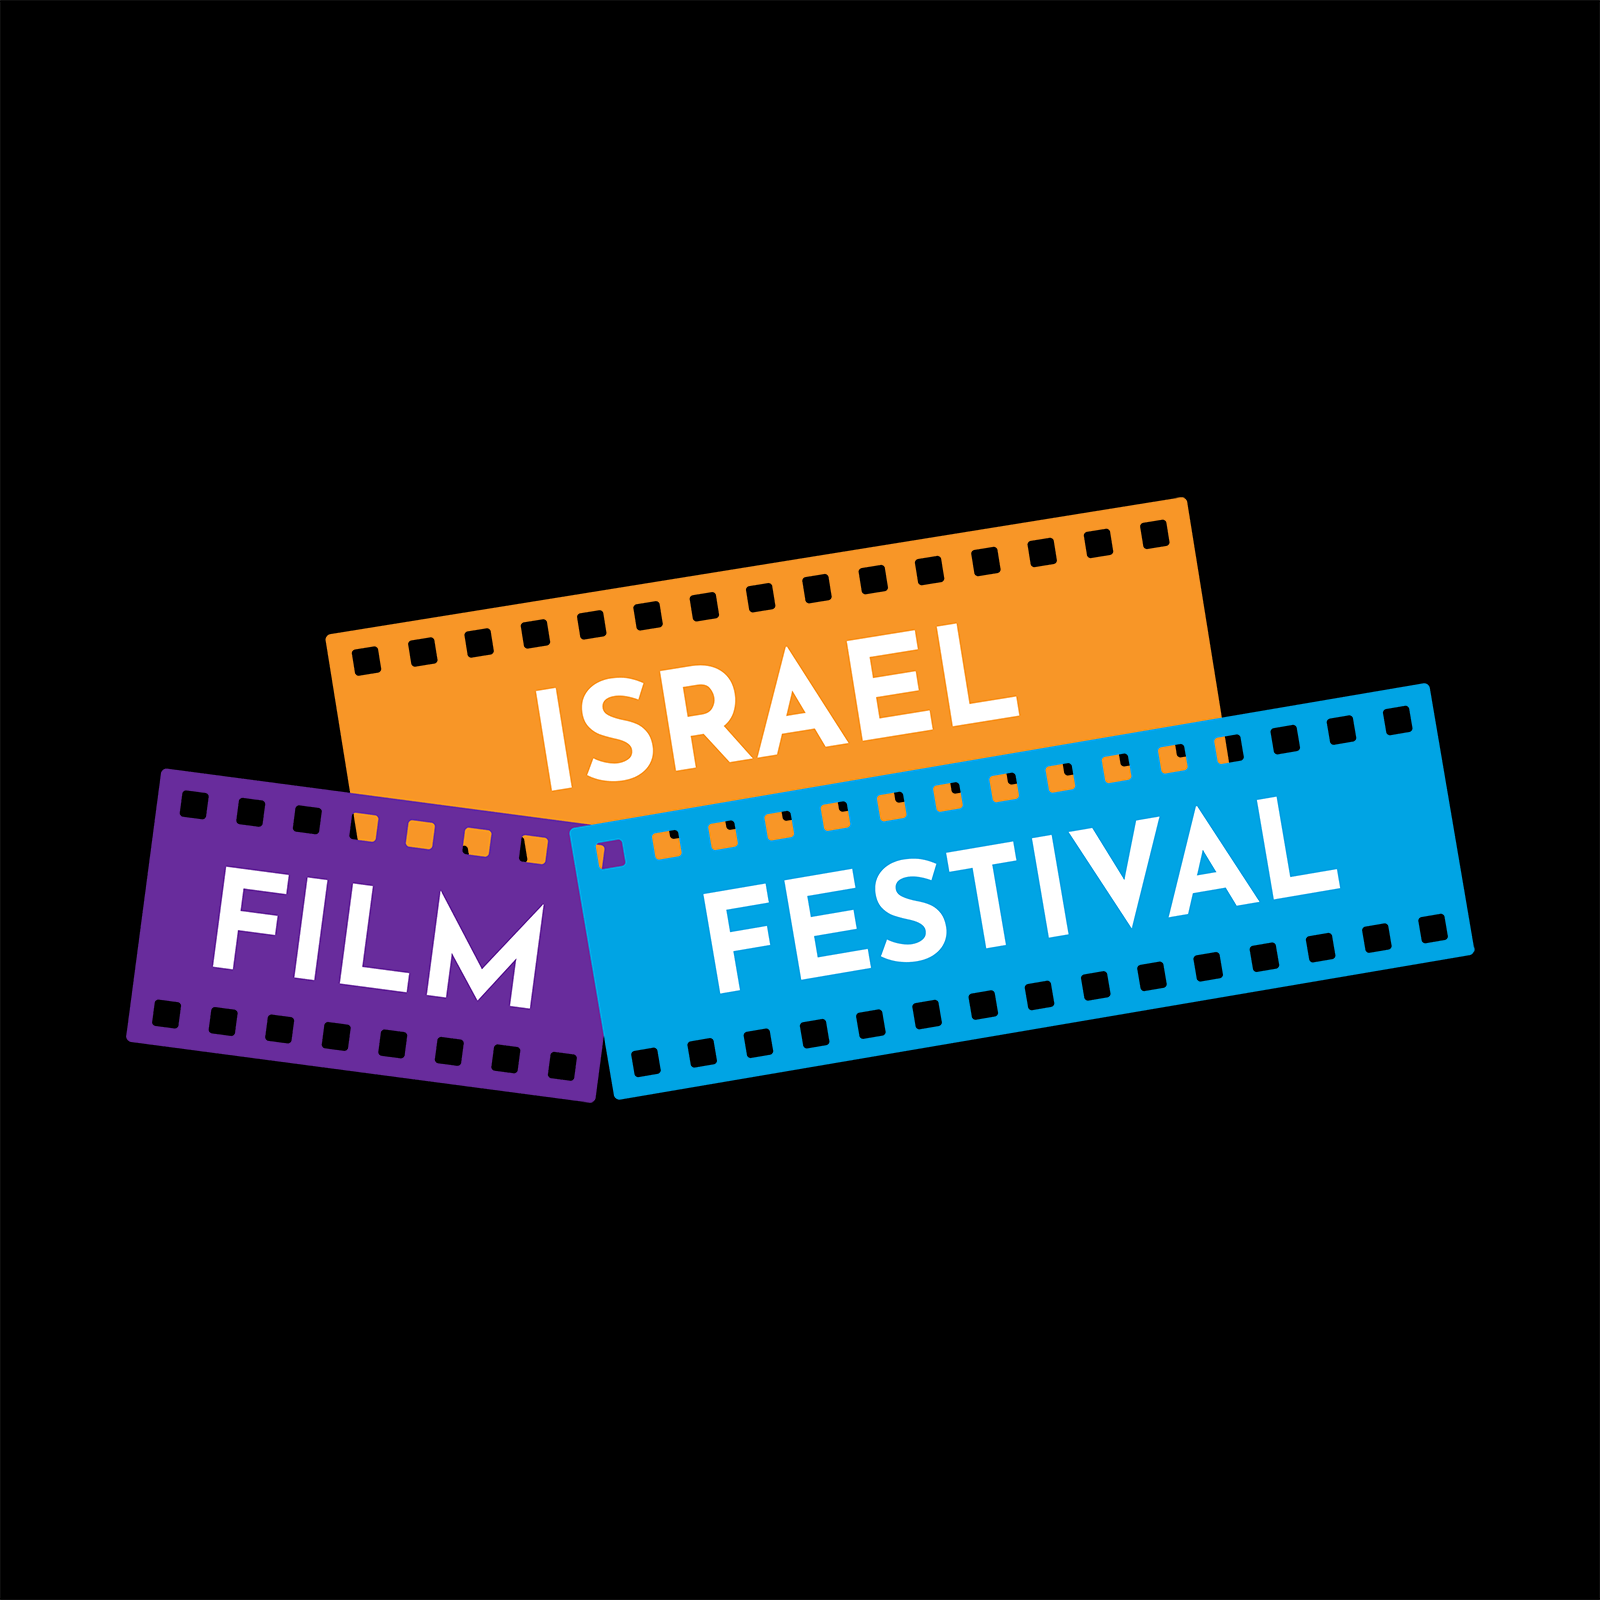 Bringing some of Israel’s most entertaining cinema to venues throughout